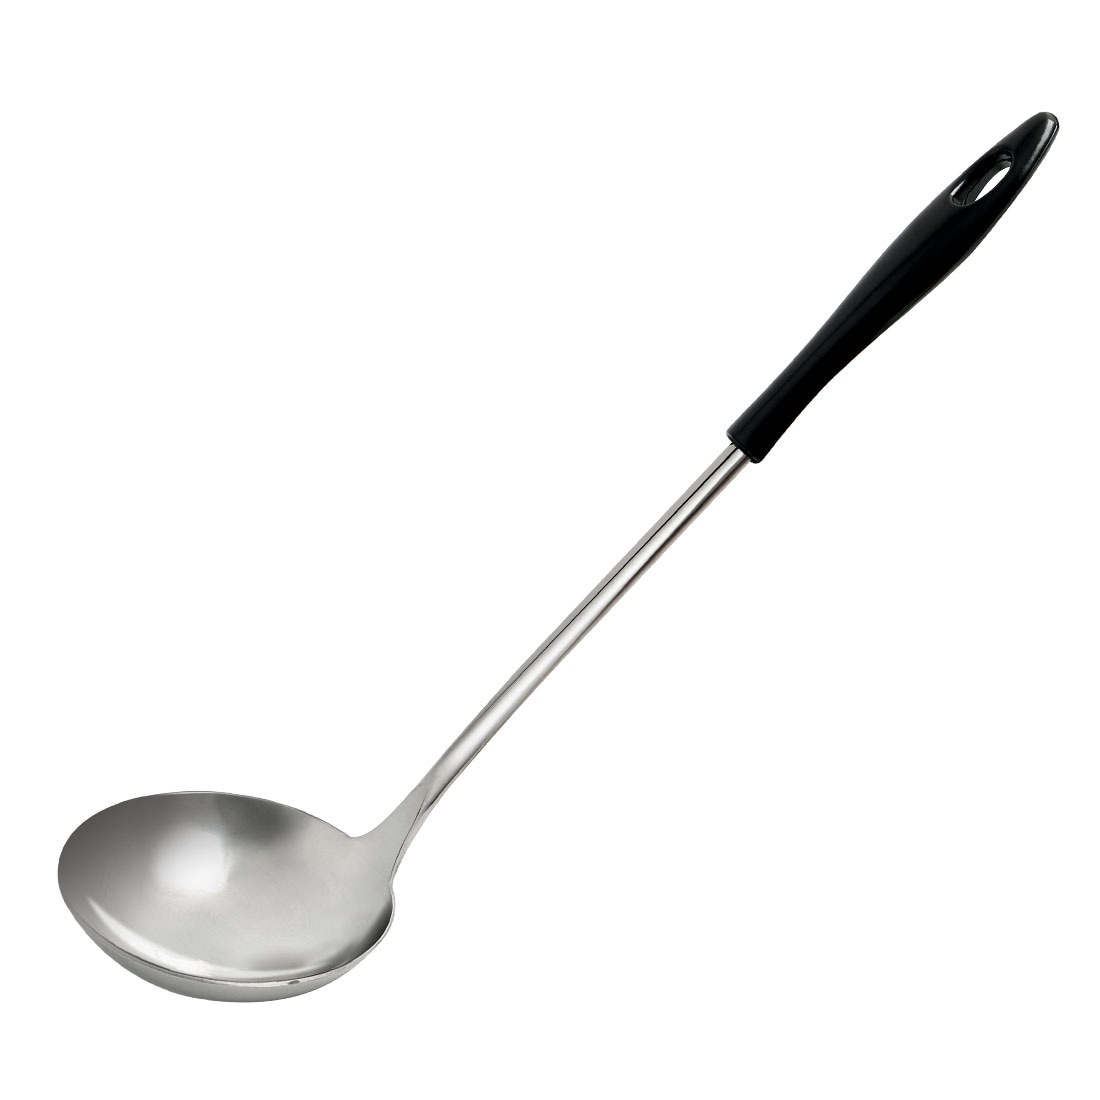 https://ak1.ostkcdn.com/images/products/is/images/direct/c42a0d7e627ef68e675d8f699ef7e674cb9f374e/Stainless-Steel-Soup-Spoon-Ladle-Home-Kitchen-Serving-Flatware.jpg